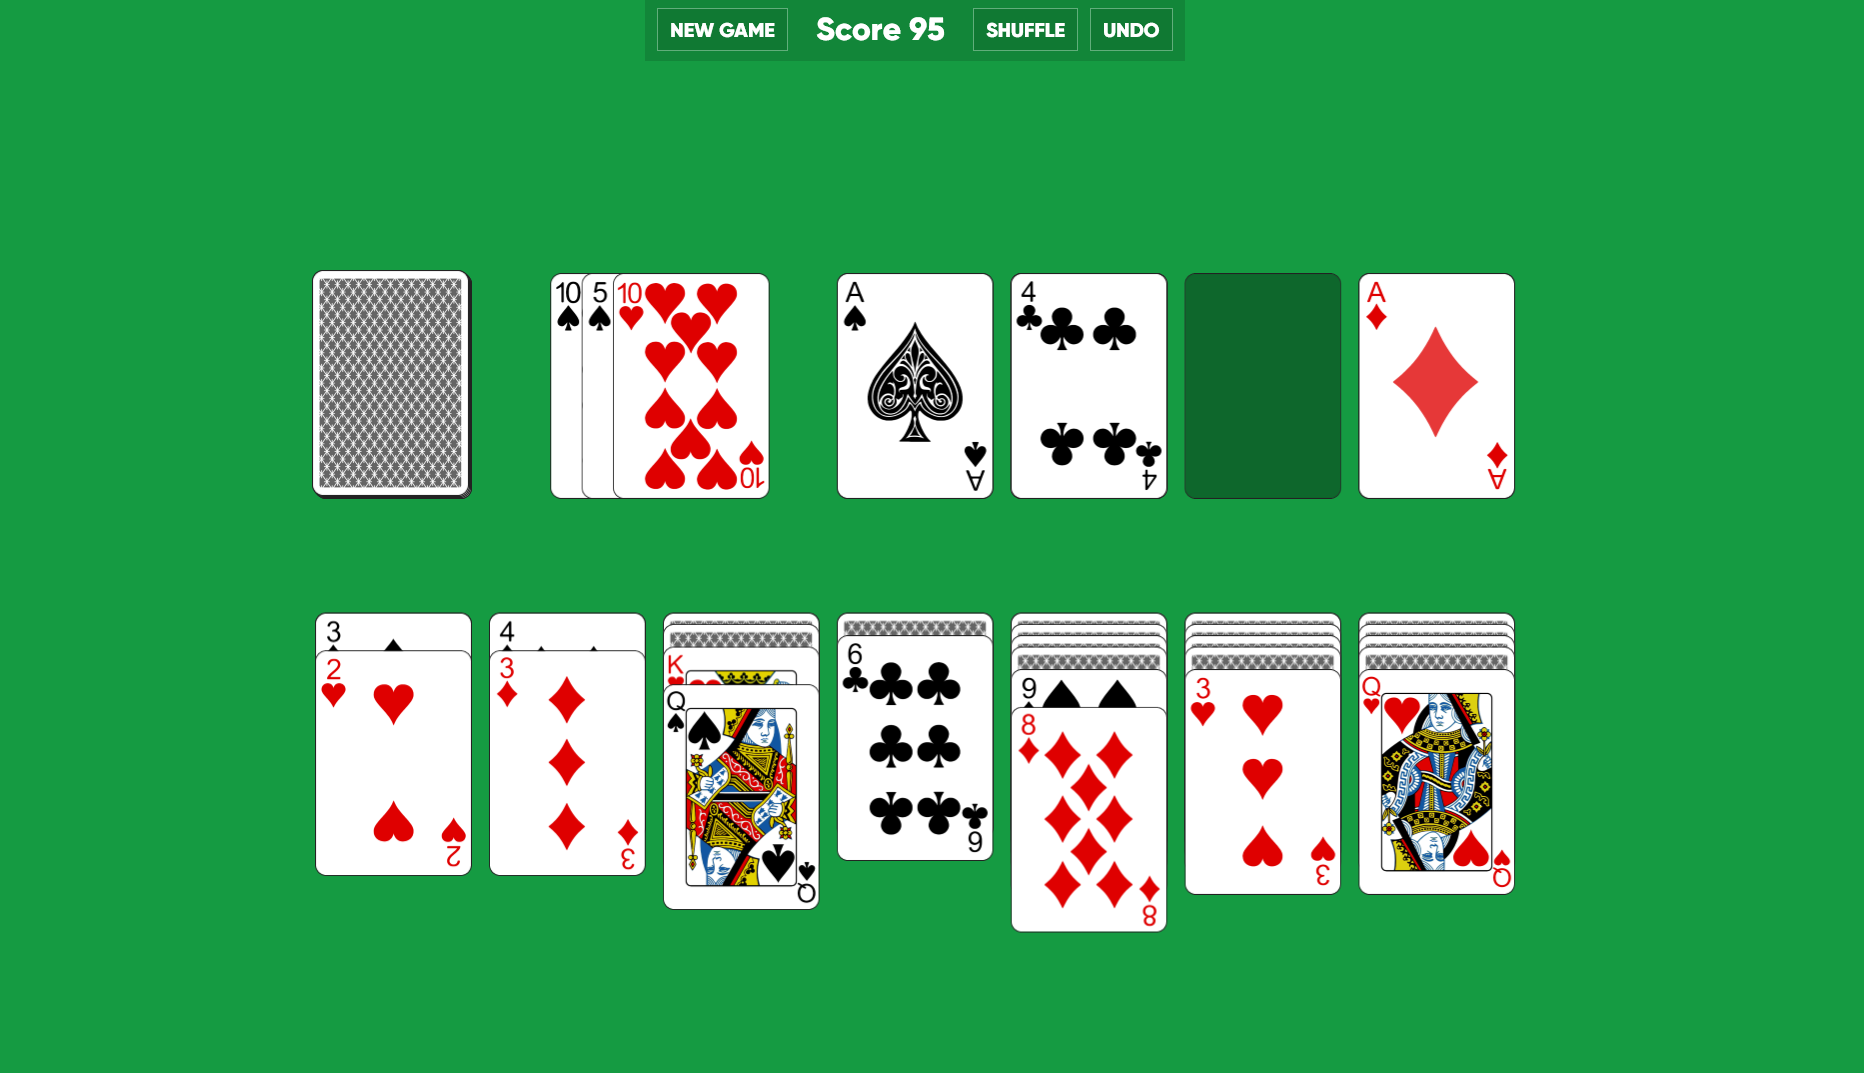 for windows instal Solitaire JD